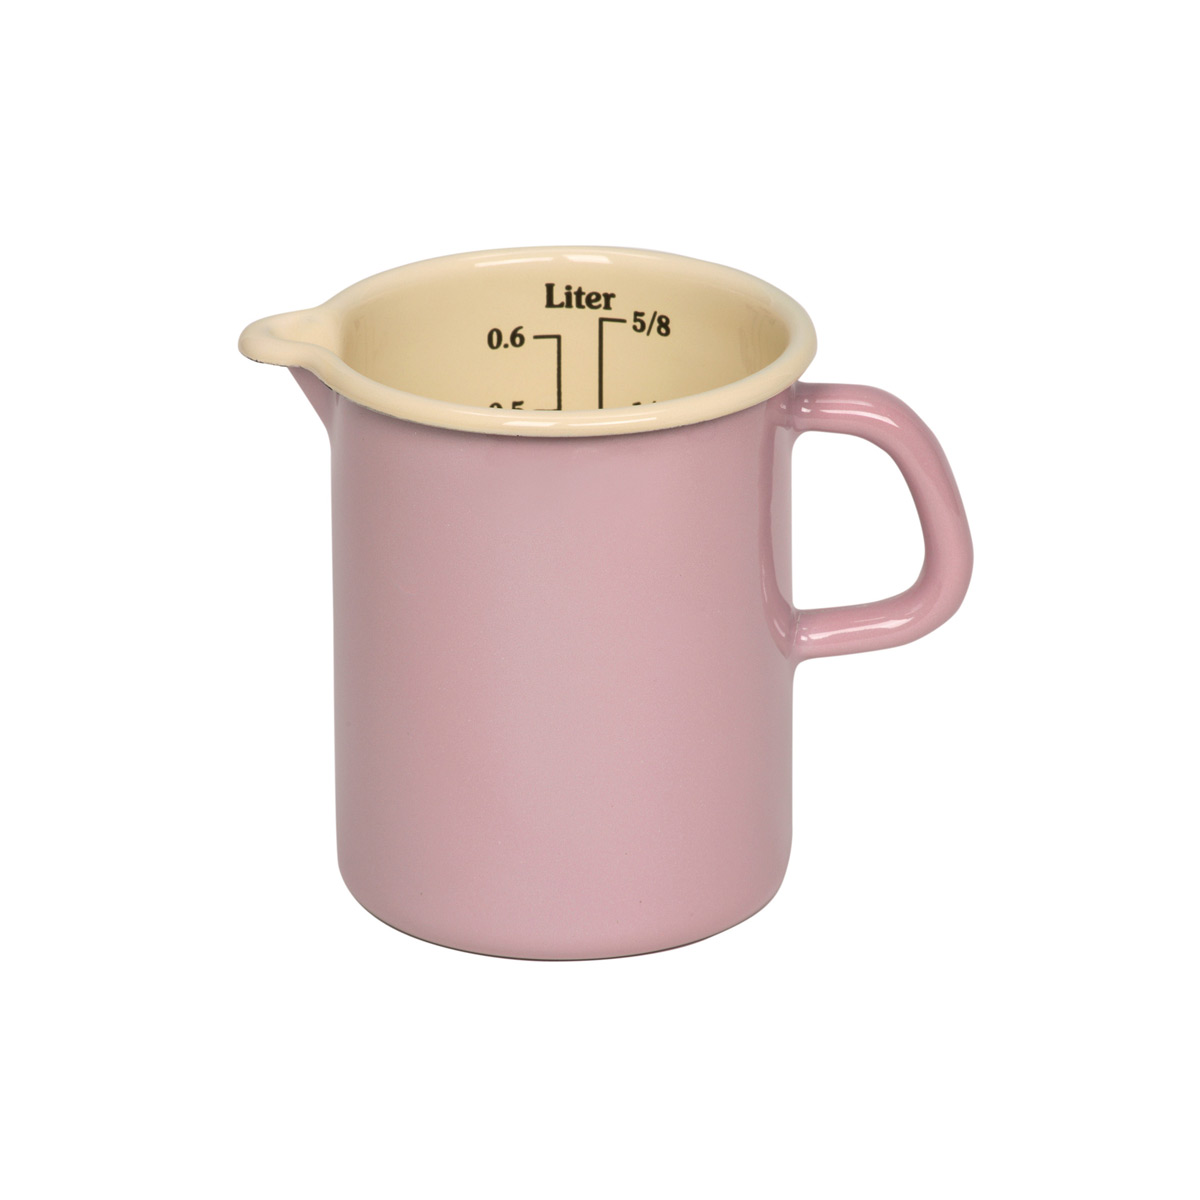 Riess Classic Bunt Pastell Küchenmaß 0,5 L rosa - Emaille